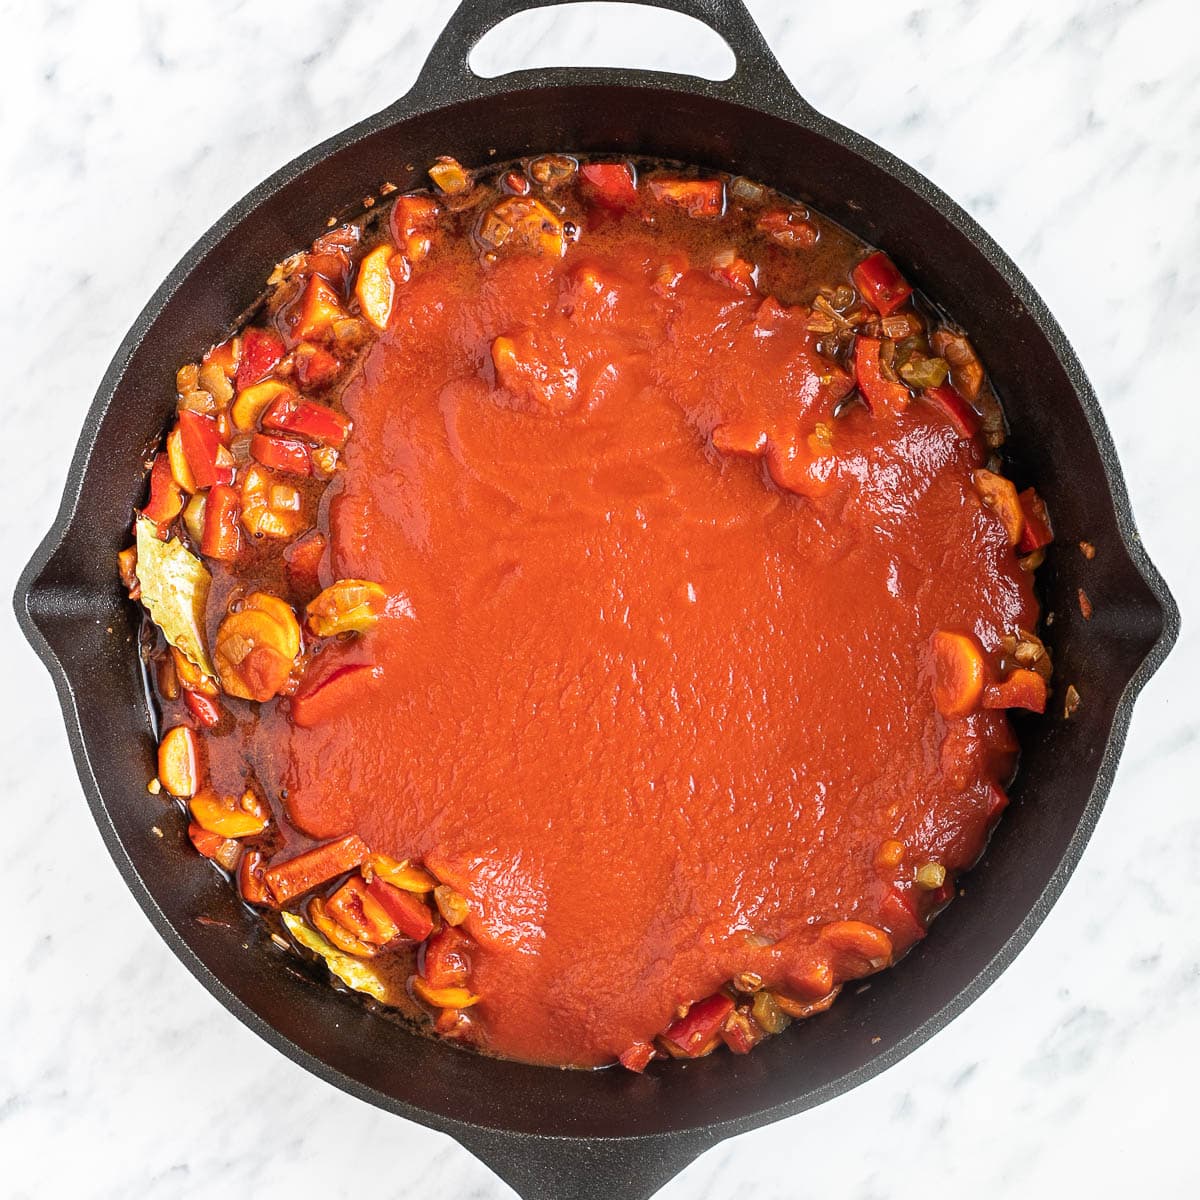 Cast iron skillet with chopped veggies in a thick red tomato sauce.